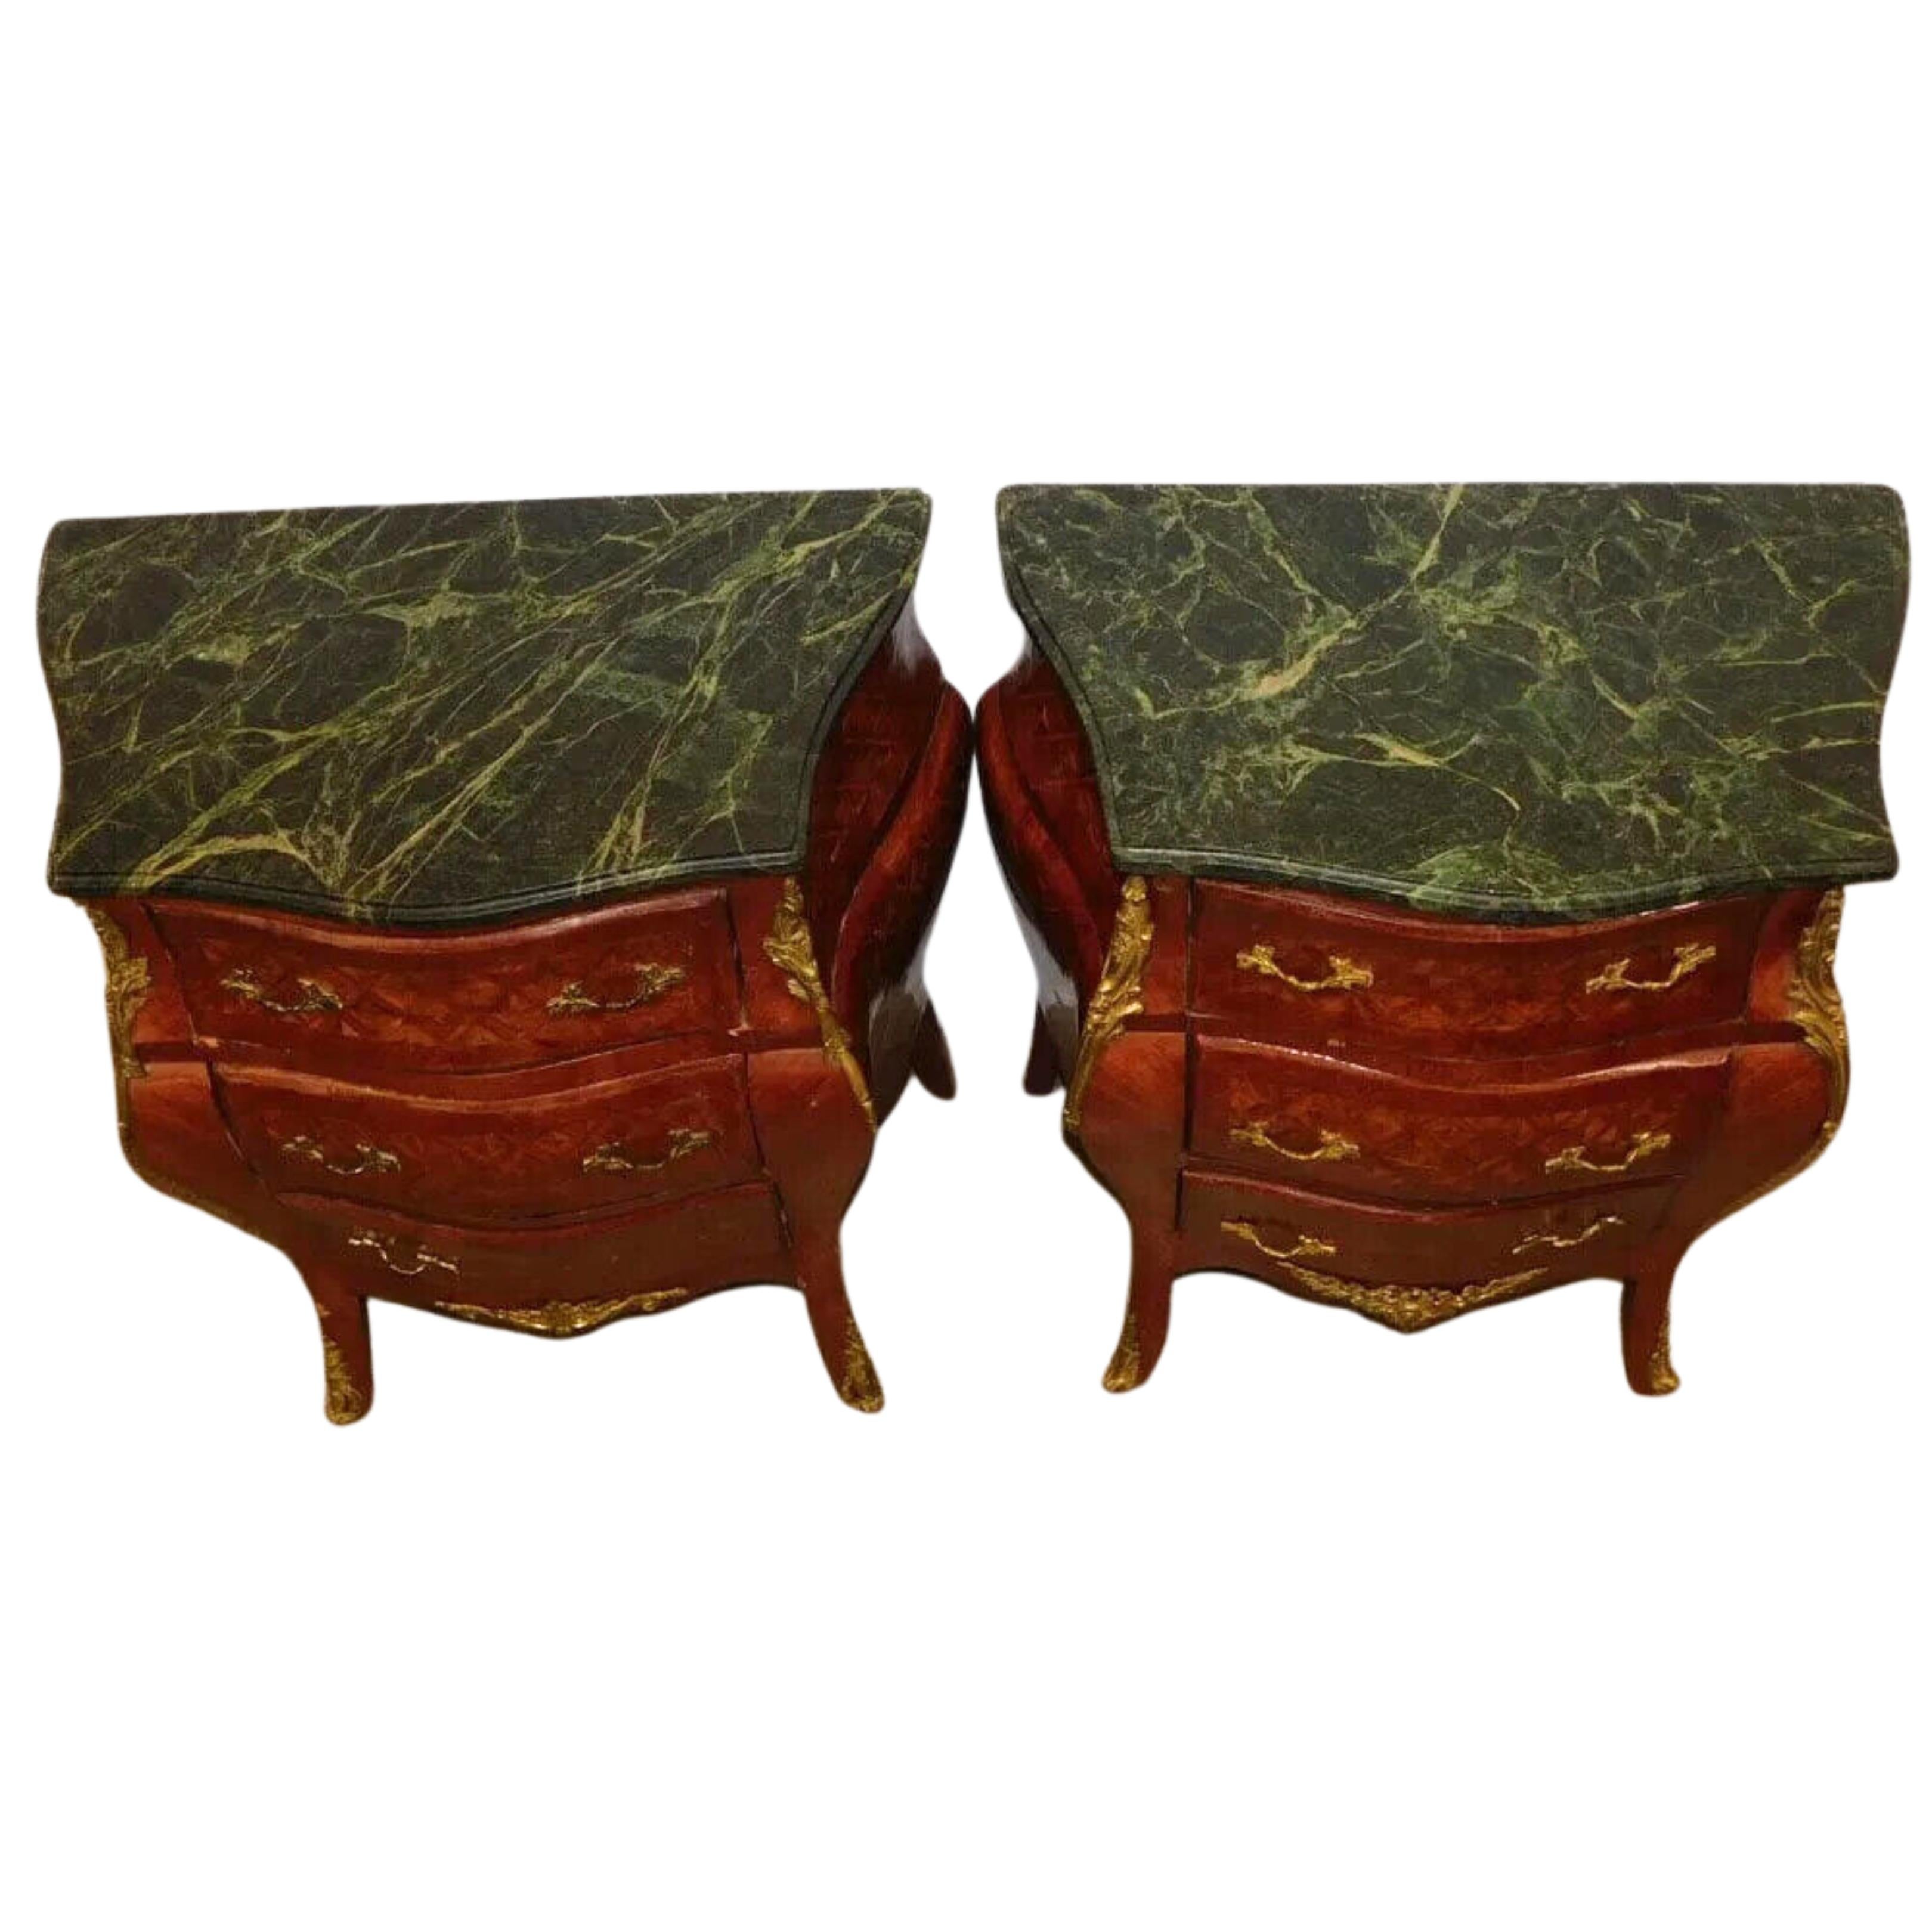 20th C. Walnut Inlay, Marble Top, Diminutive, With Bronze Commodes, Set of Two! For Sale 1